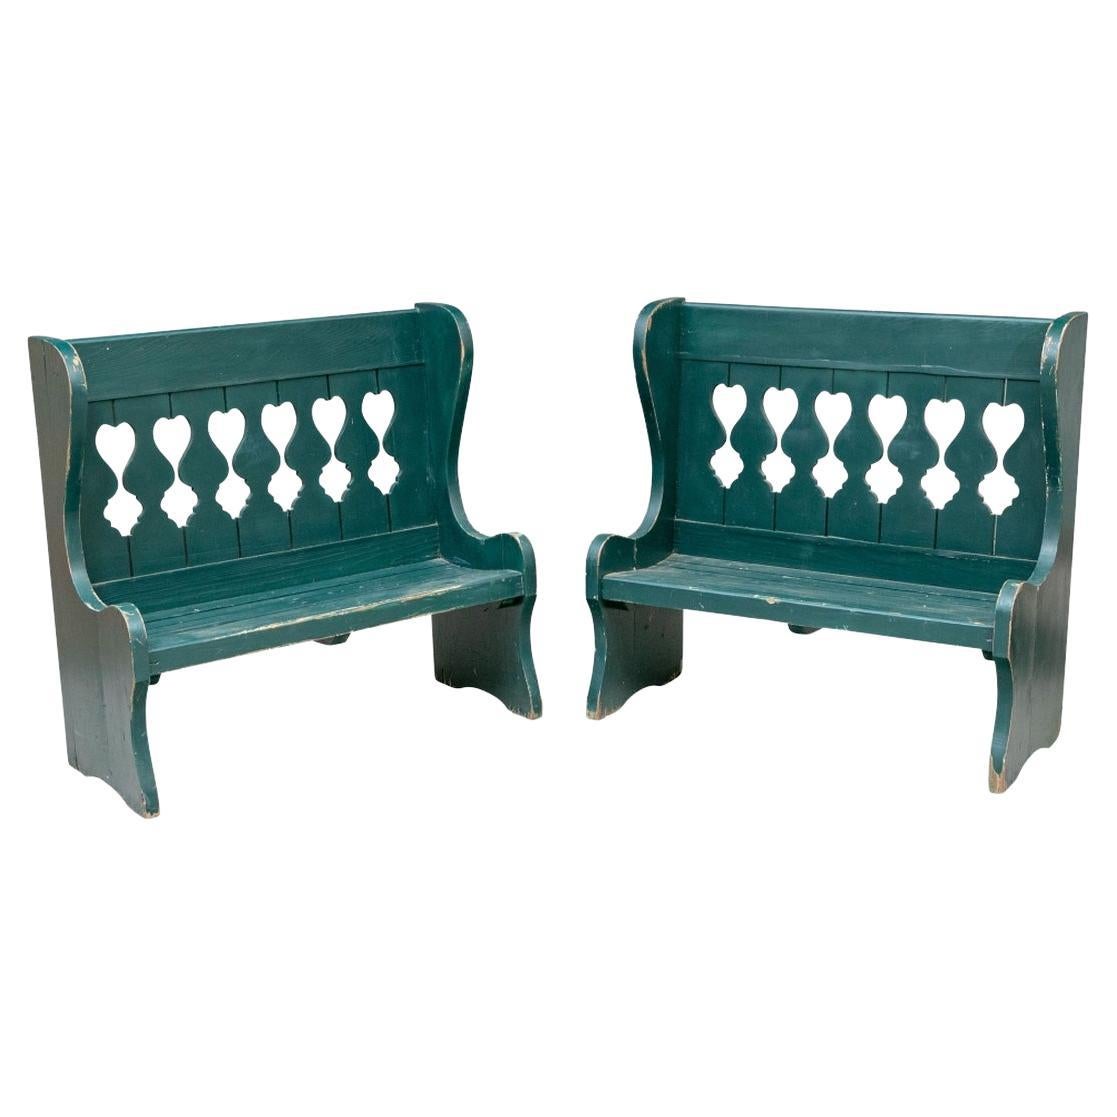 Exceptional Pair of Antique Green Paint Wingback Porch Benches For Sale